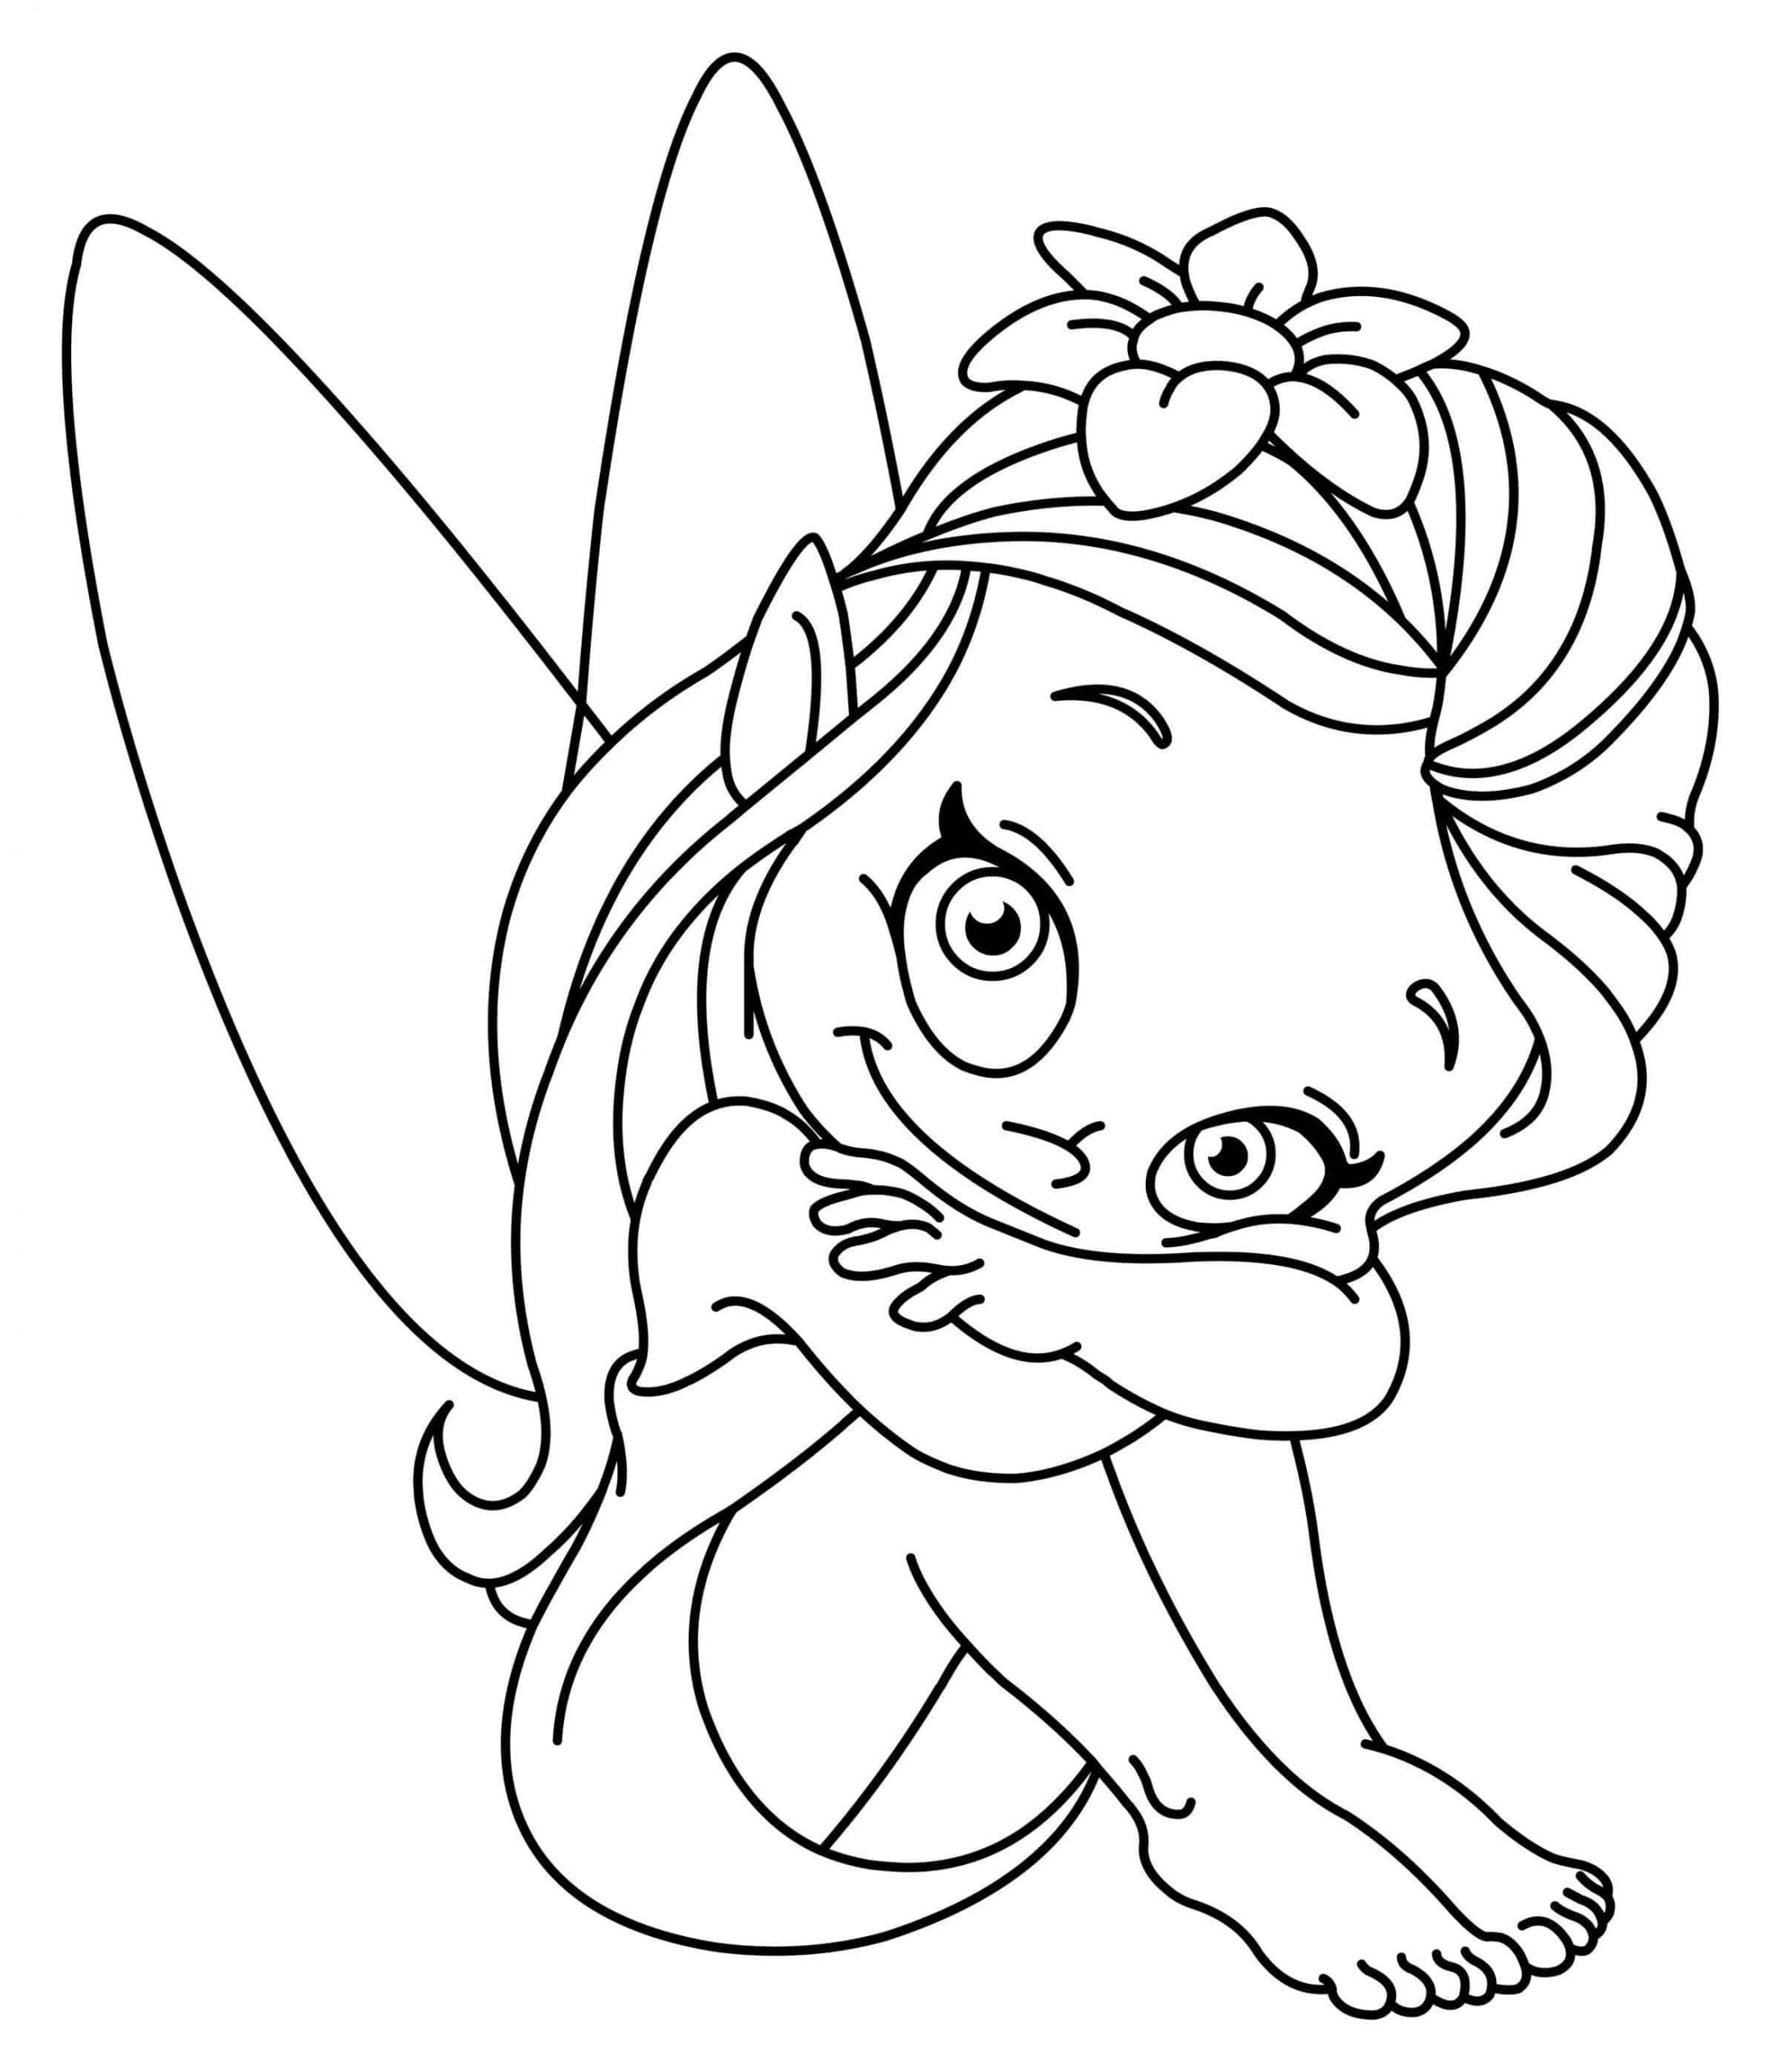 Free Coloring Sheets For Girls
 The Best Free Coloring Pages For Girls